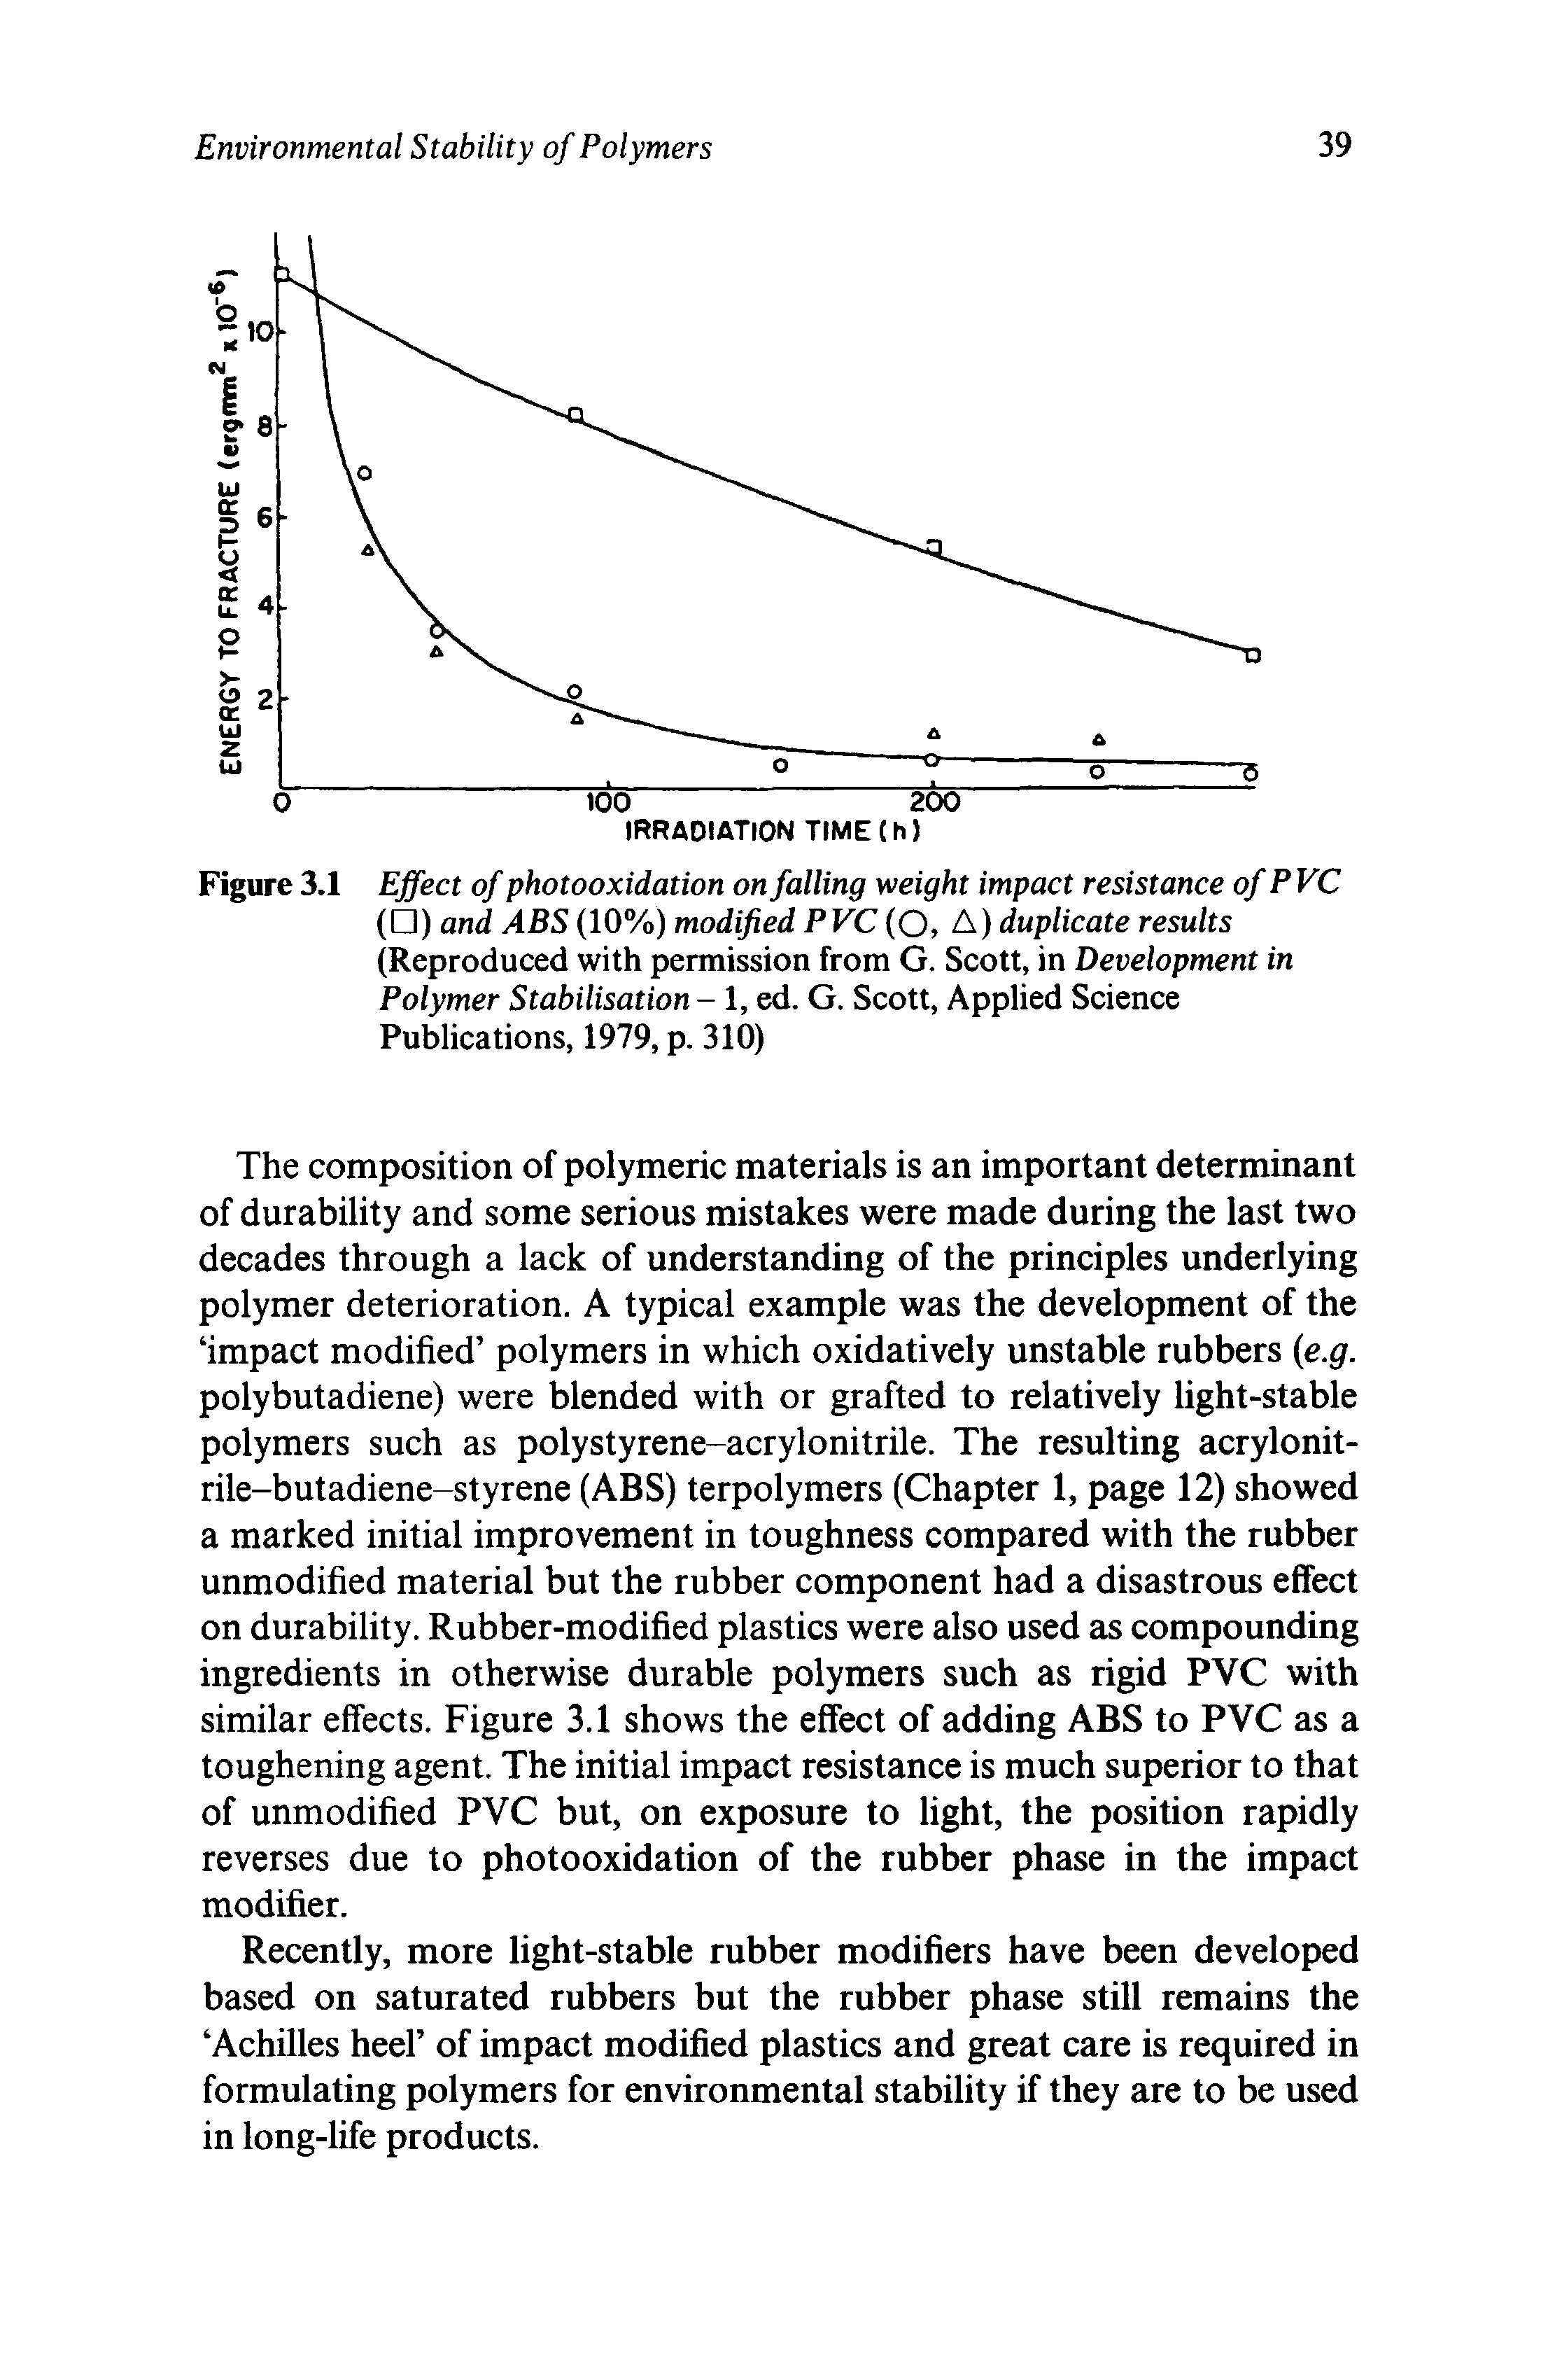 Figure 3.1 Effect of photooxidation on falling weight impact resistance ofPVC ( ) and ABS (10%) modified PVC (O, A) duplicate results (Reproduced with permission from G. Scott, in Development in Polymer Stabilisation -1, ed. G. Scott, Applied Science Publications, 1979, p. 310)...